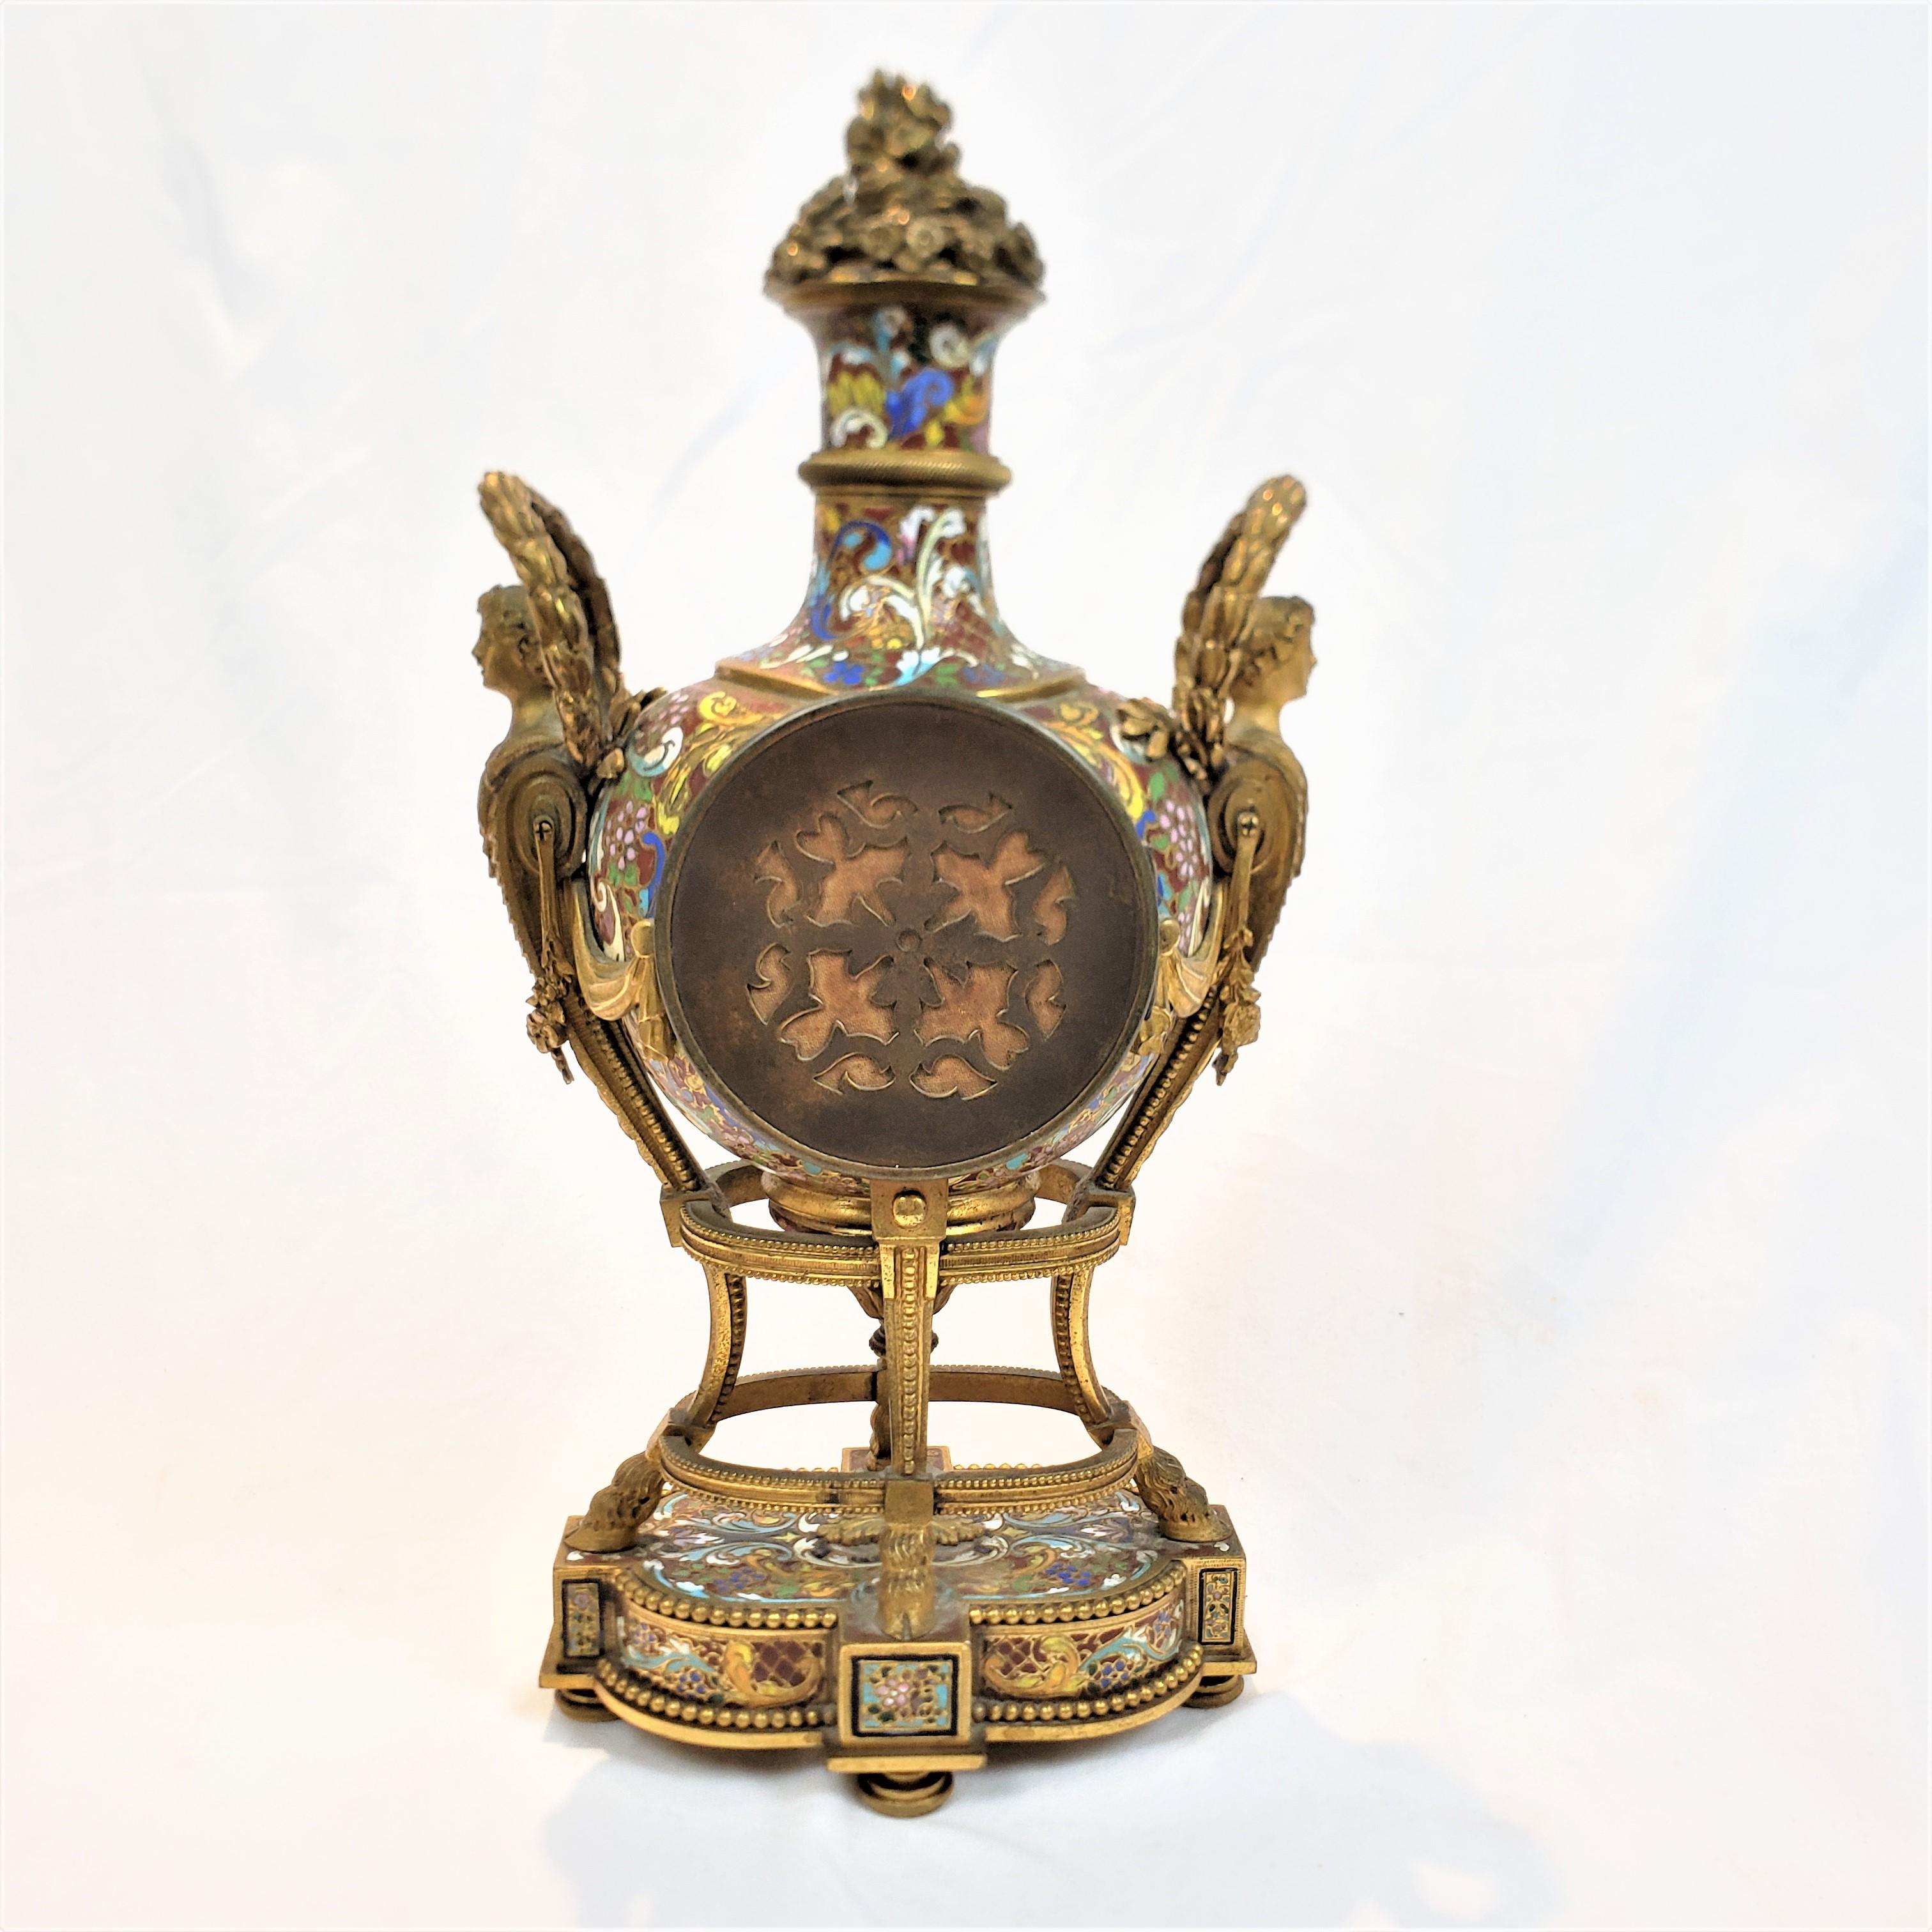 19th Century Antique French Gilt Bronze & Champleve 'Marie Antoinette' Mantel or Table Clock For Sale